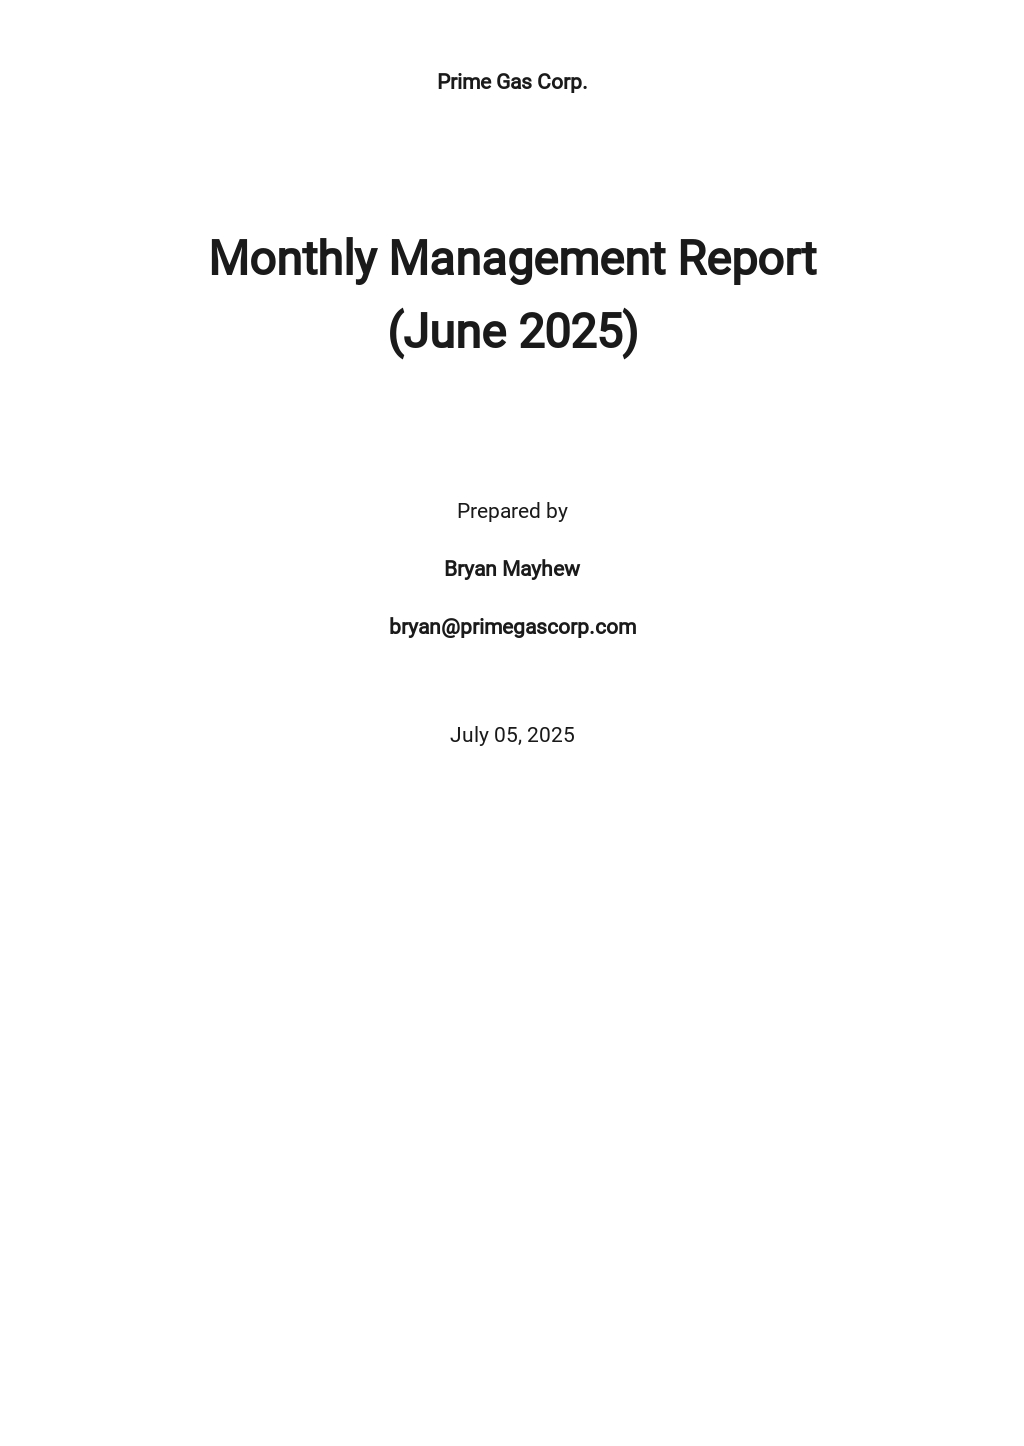 Free Monthly Management Report Sample.jpe